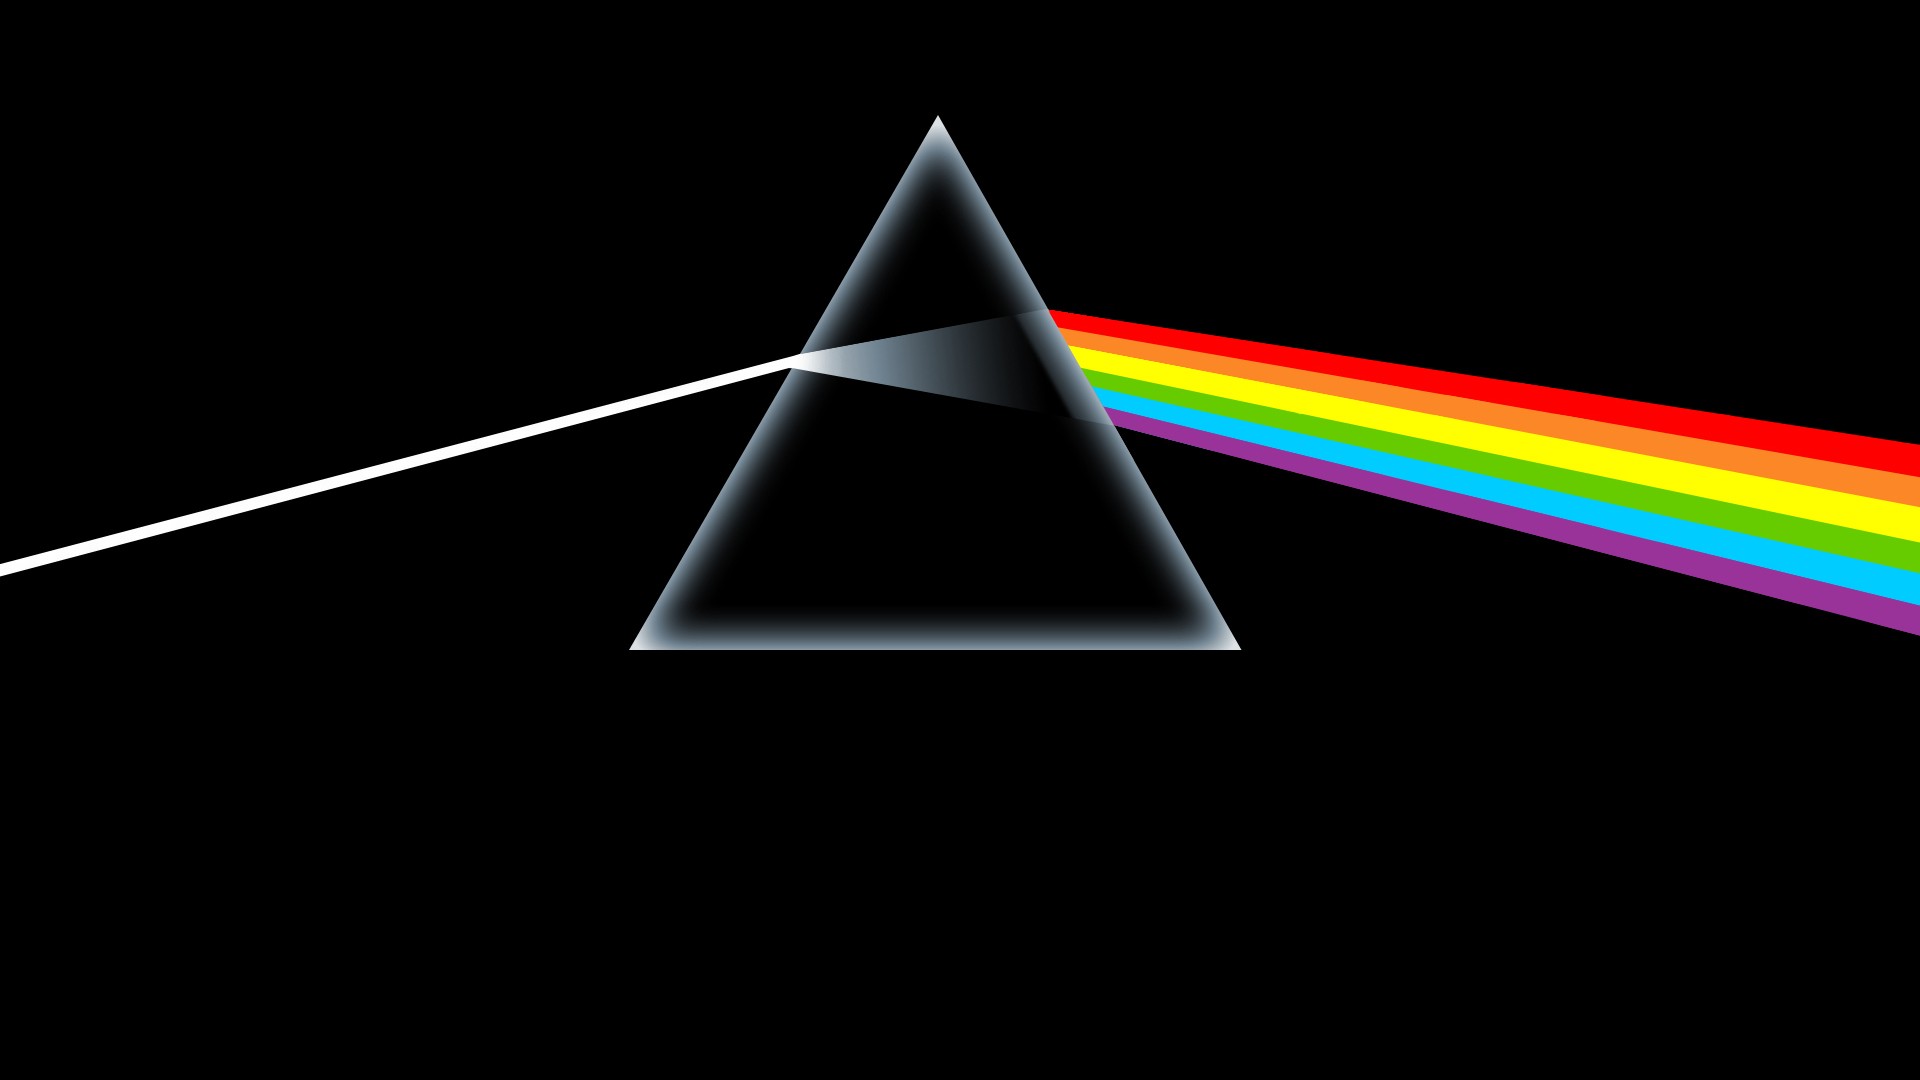 General 1920x1080 Pink Floyd prism album covers cover art triangle geometric figures simple background The Dark Side of the Moon